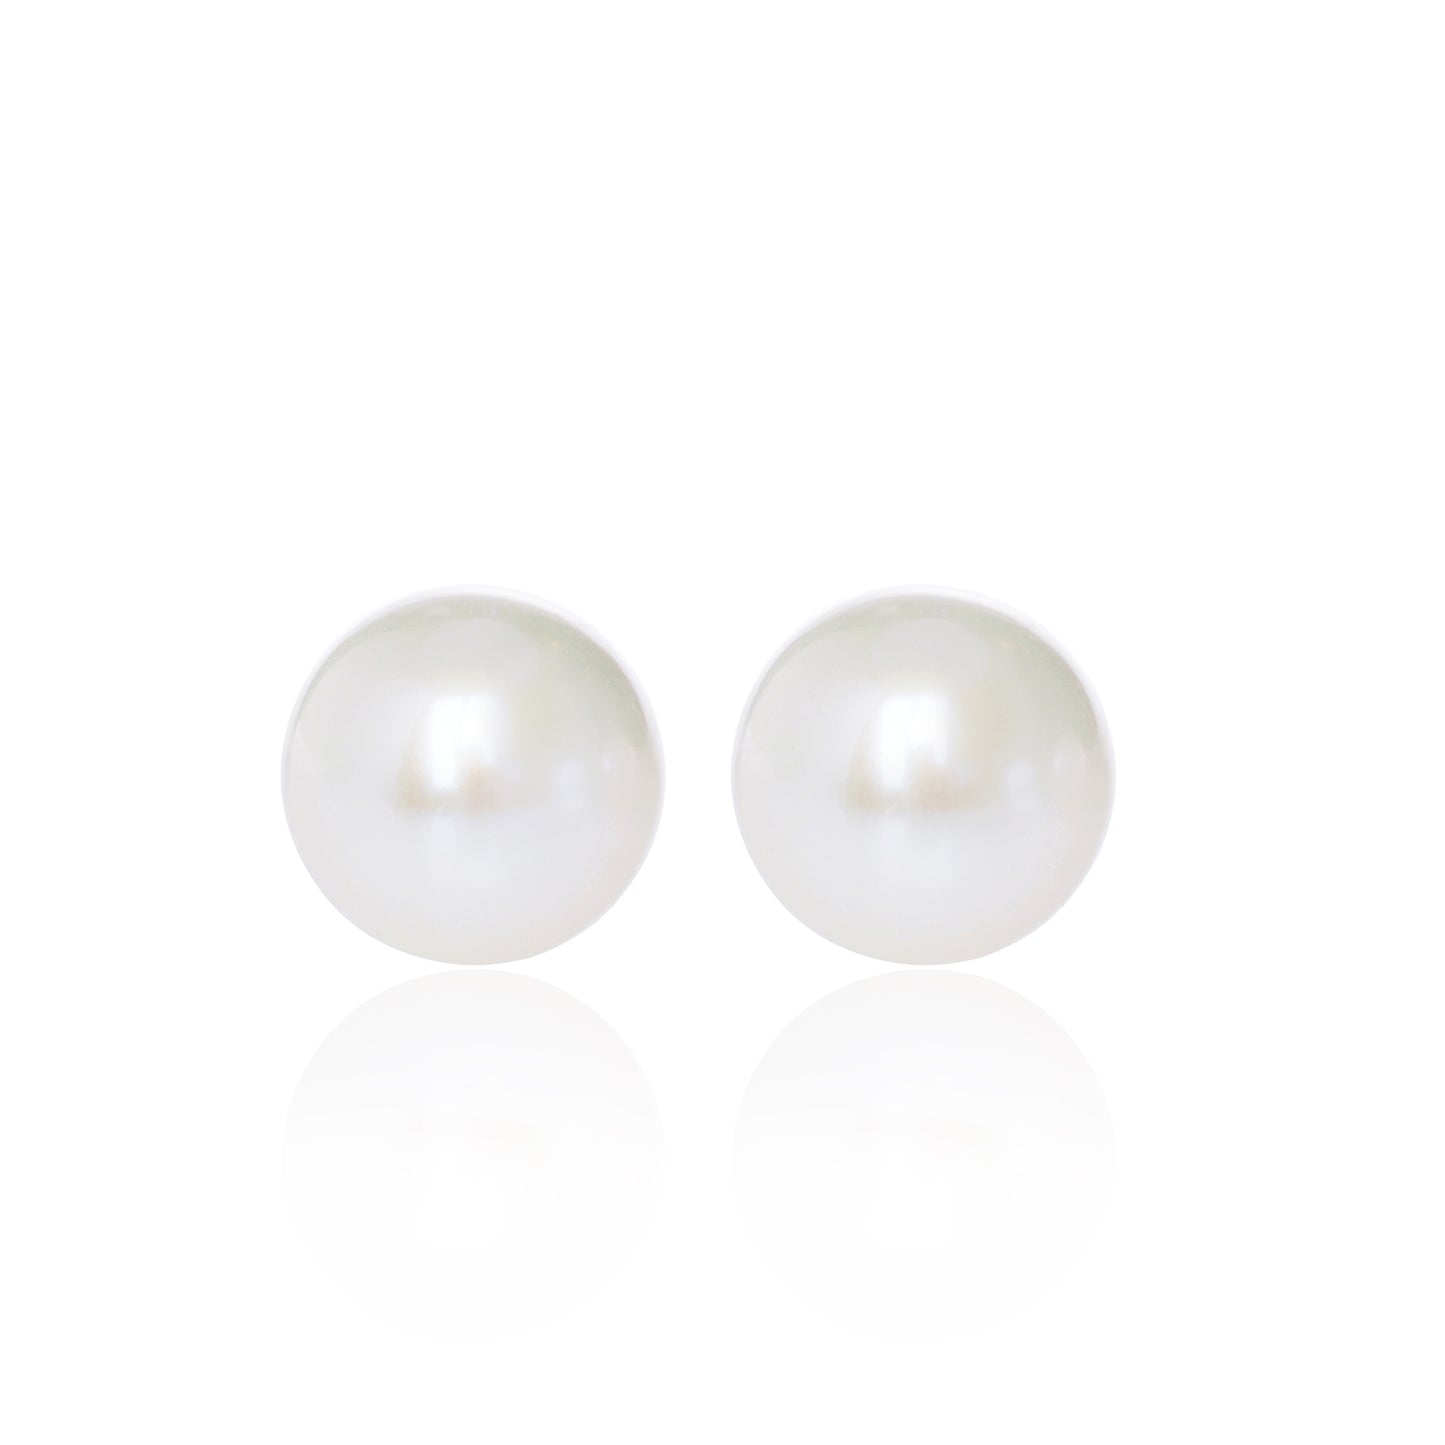 Front view of our Big Pearl Studs handmade in Switzerland in 18ct yellow gold by McFarlane Fine Jewellery